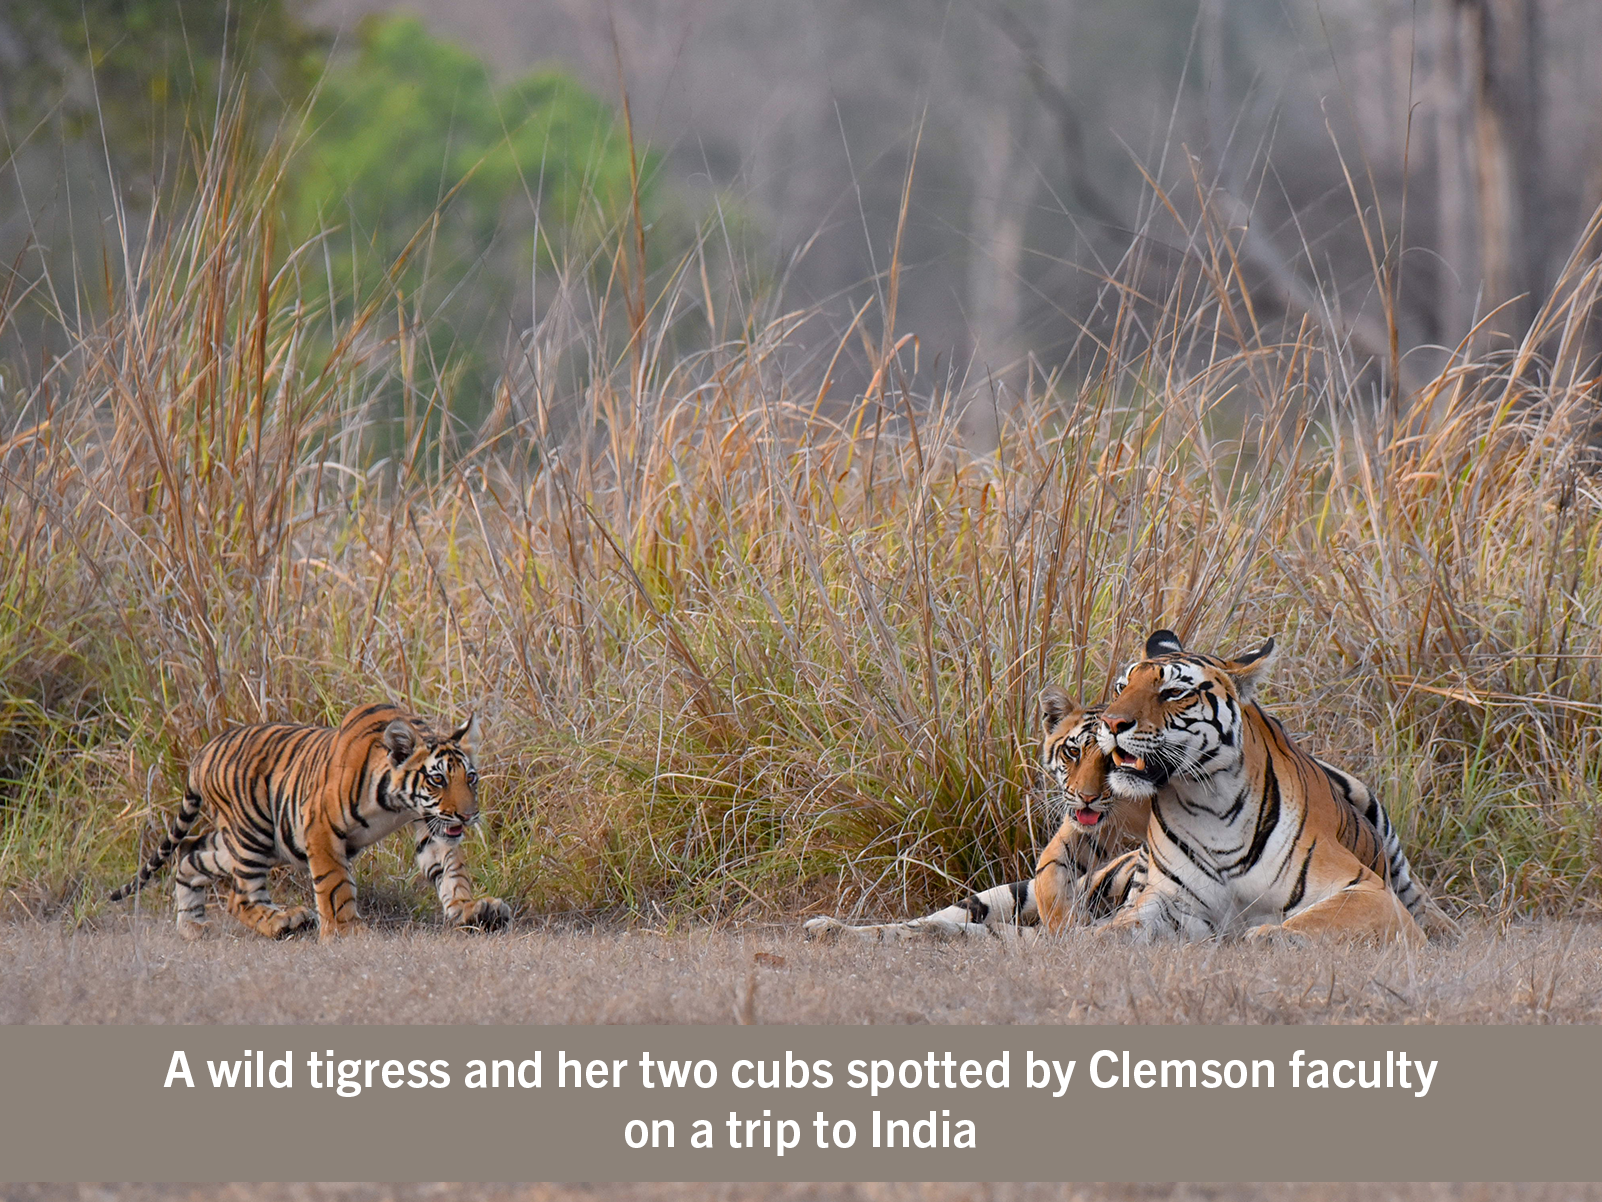 A tigress and her two cubs lounge in the grass in India.